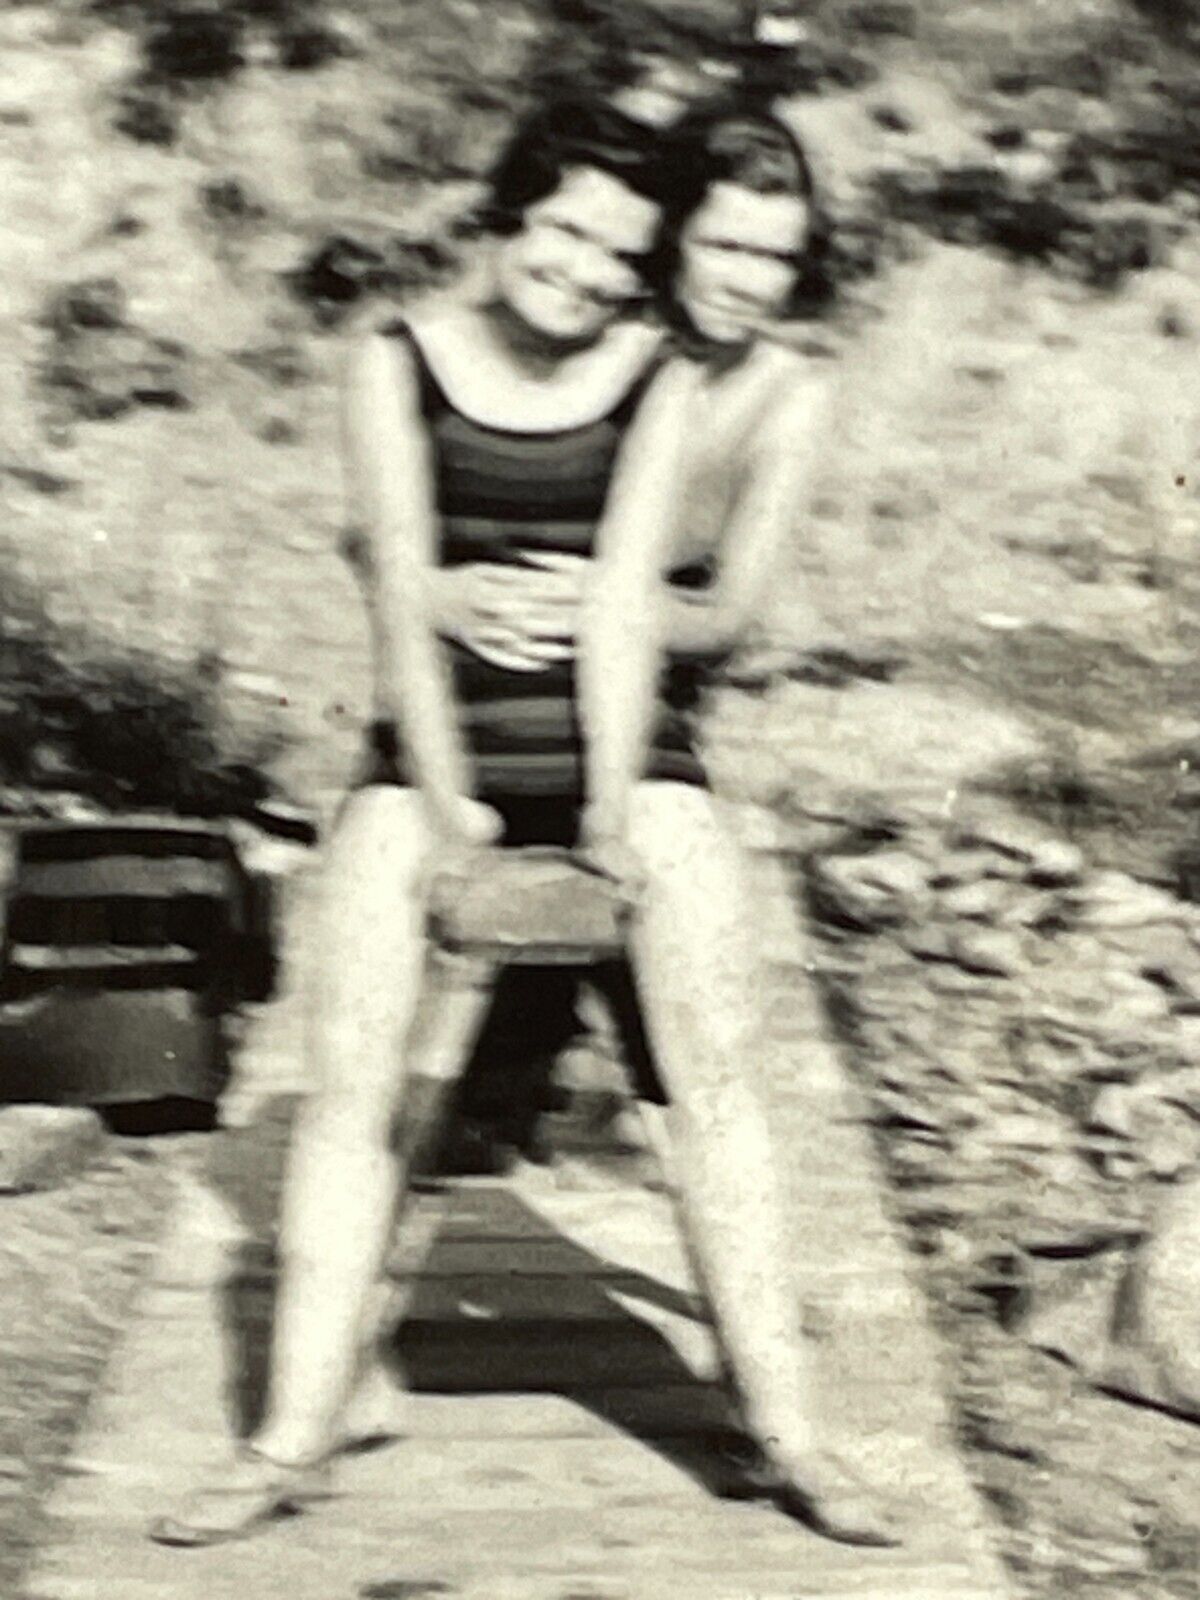 XH Photograph BLURRY BLURRED Two Pretty Women Bathing Suits Embrace 1940's 